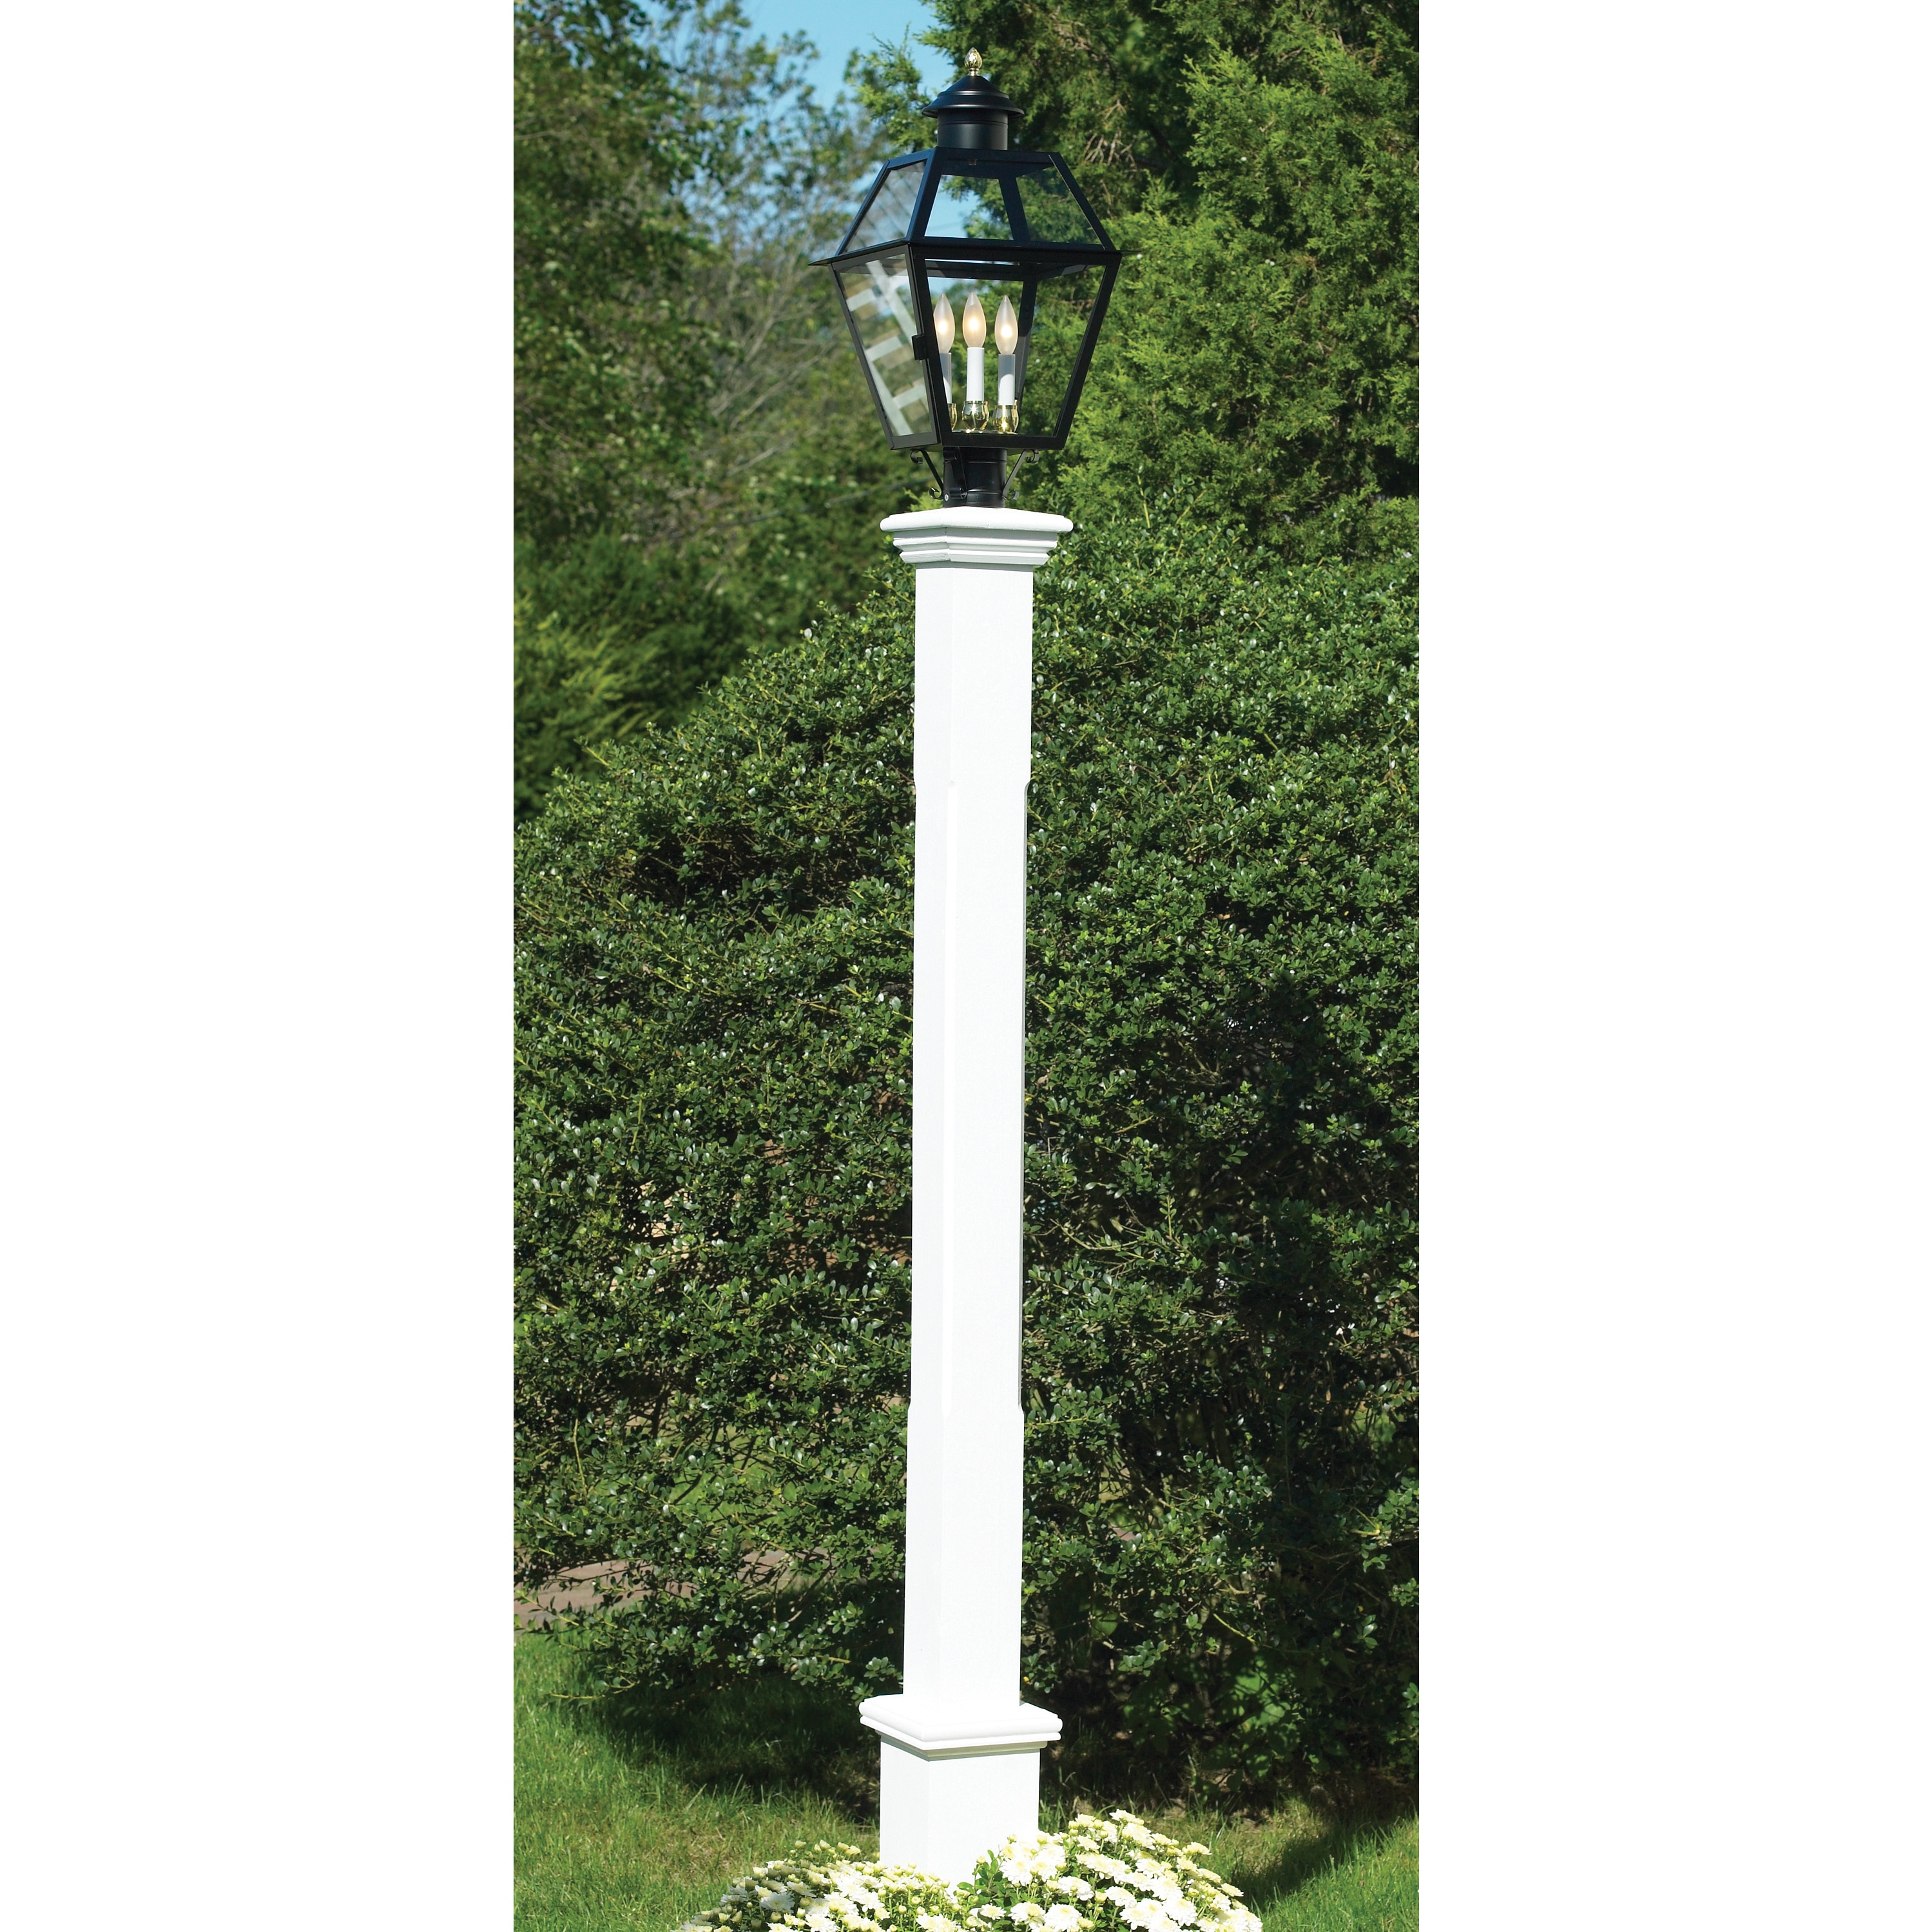 Lazy Hill Farm Designs Barrington White Lantern Post (WhiteMaterials CedarQuantity One (1) postSetting OutdoorDimensions 104 inches high x 4.5 inches wide x 4.5 inches longWeight 43 poundsAssembly Required )